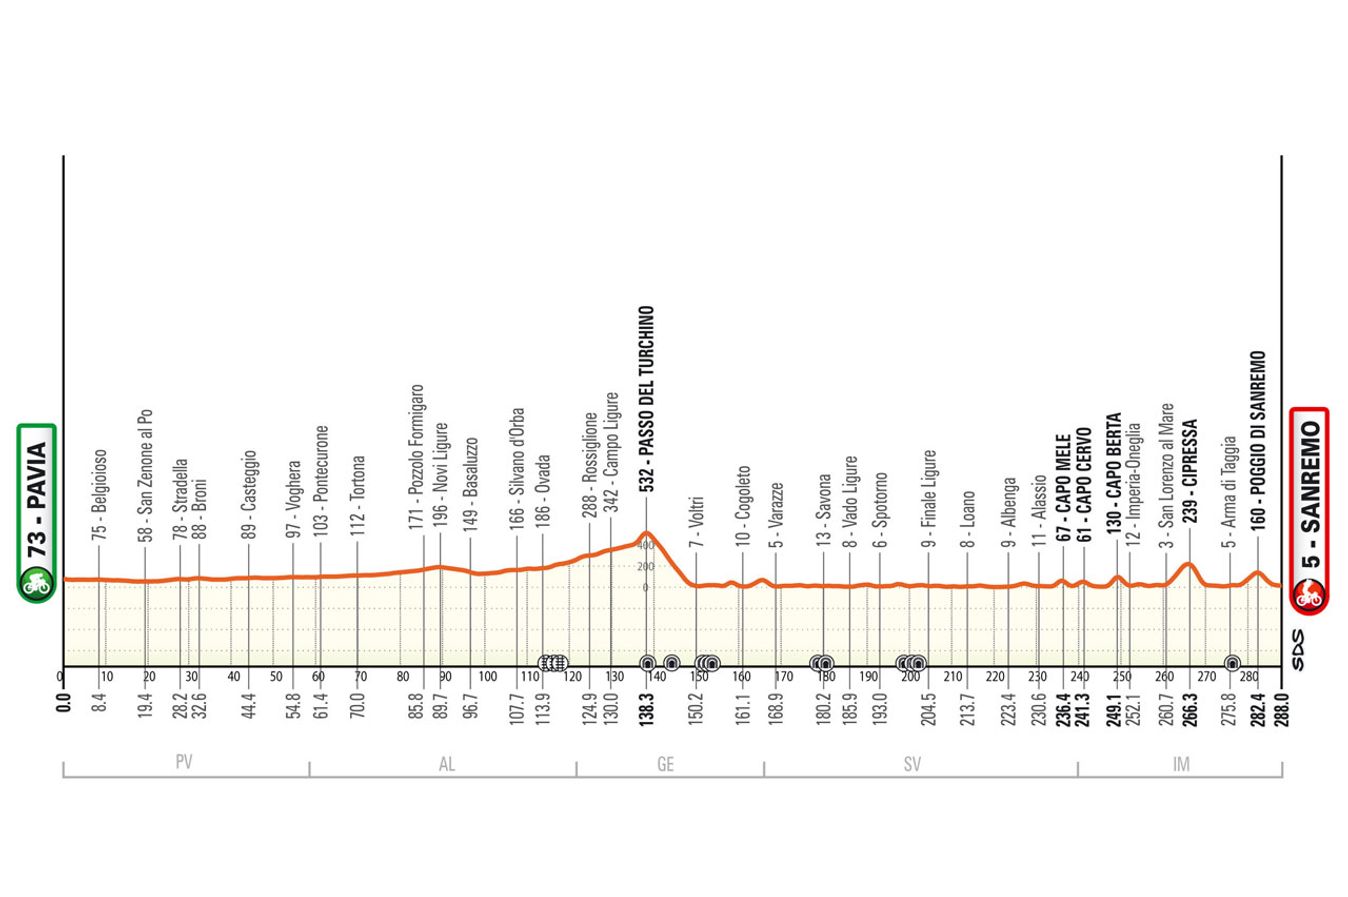 The profile of the 2024 Milan-San Remo route